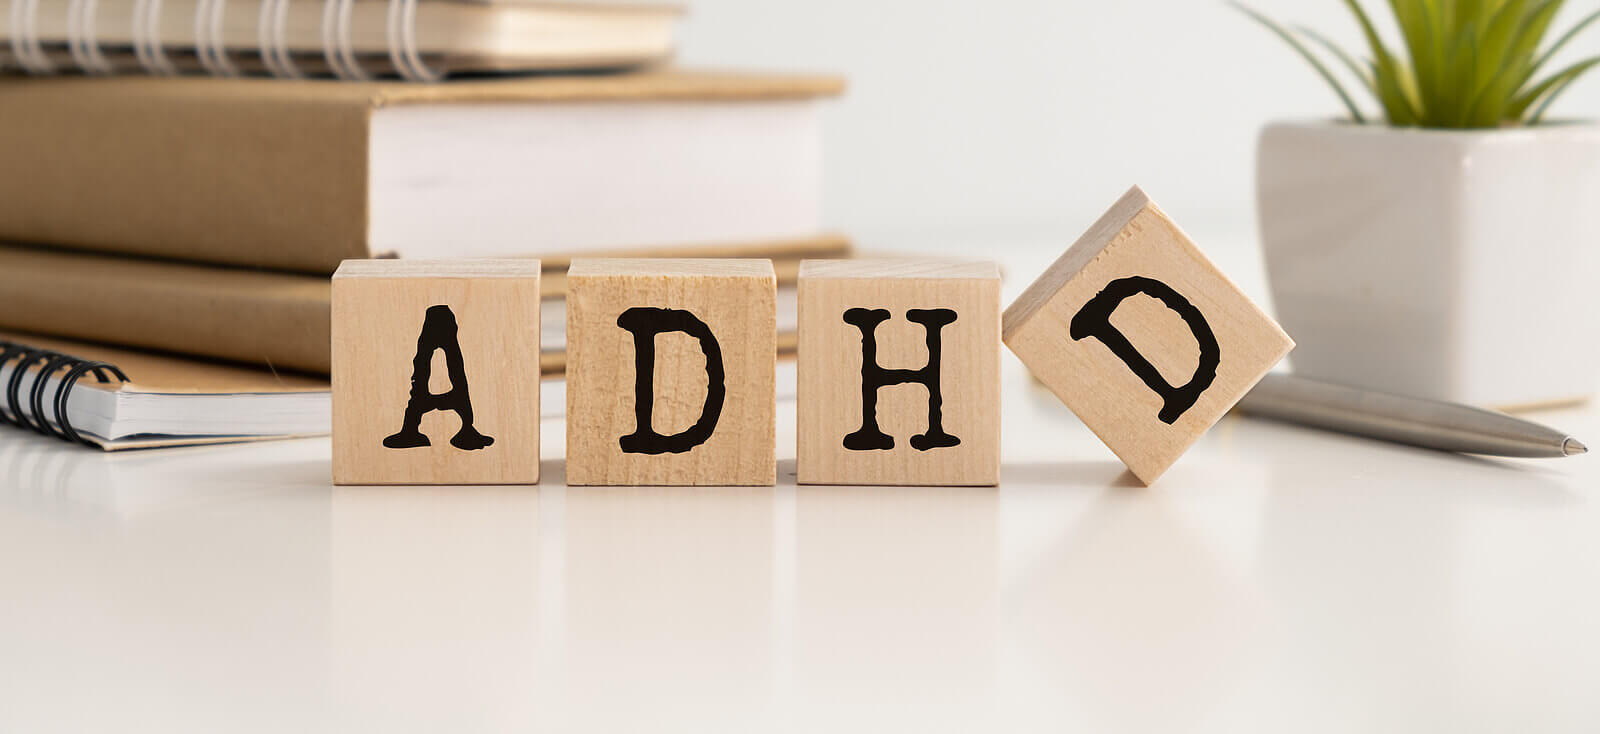 Ways to Get Organized When You Have ADHD I Psych Central